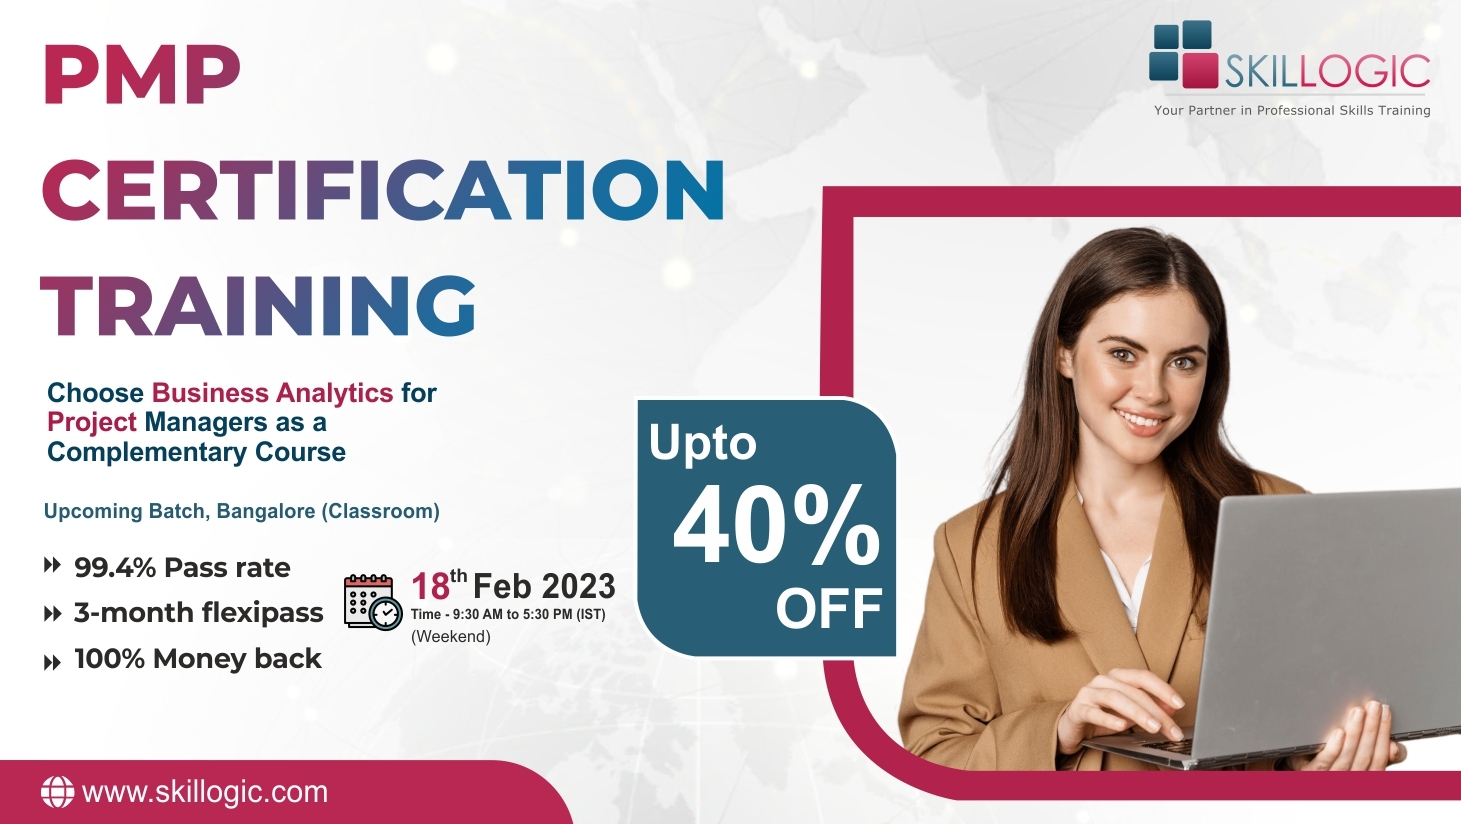 PMP Course in Chandigarh, Chandigarh, Punjab, India